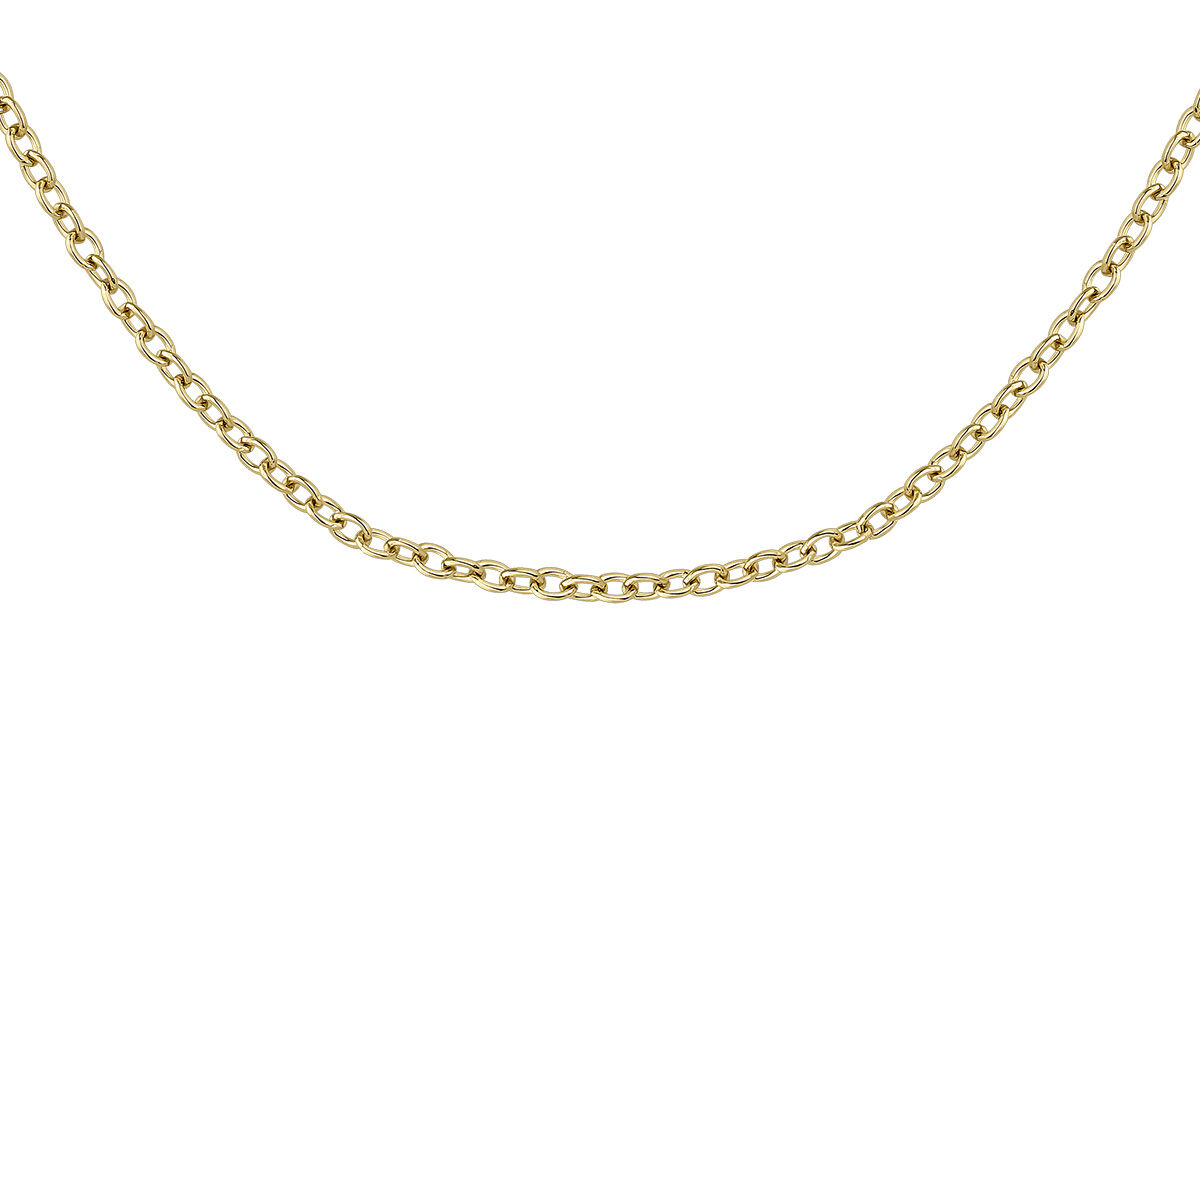 Thin chain with rolo links in 9k yellow gold, J05330-02, hi-res